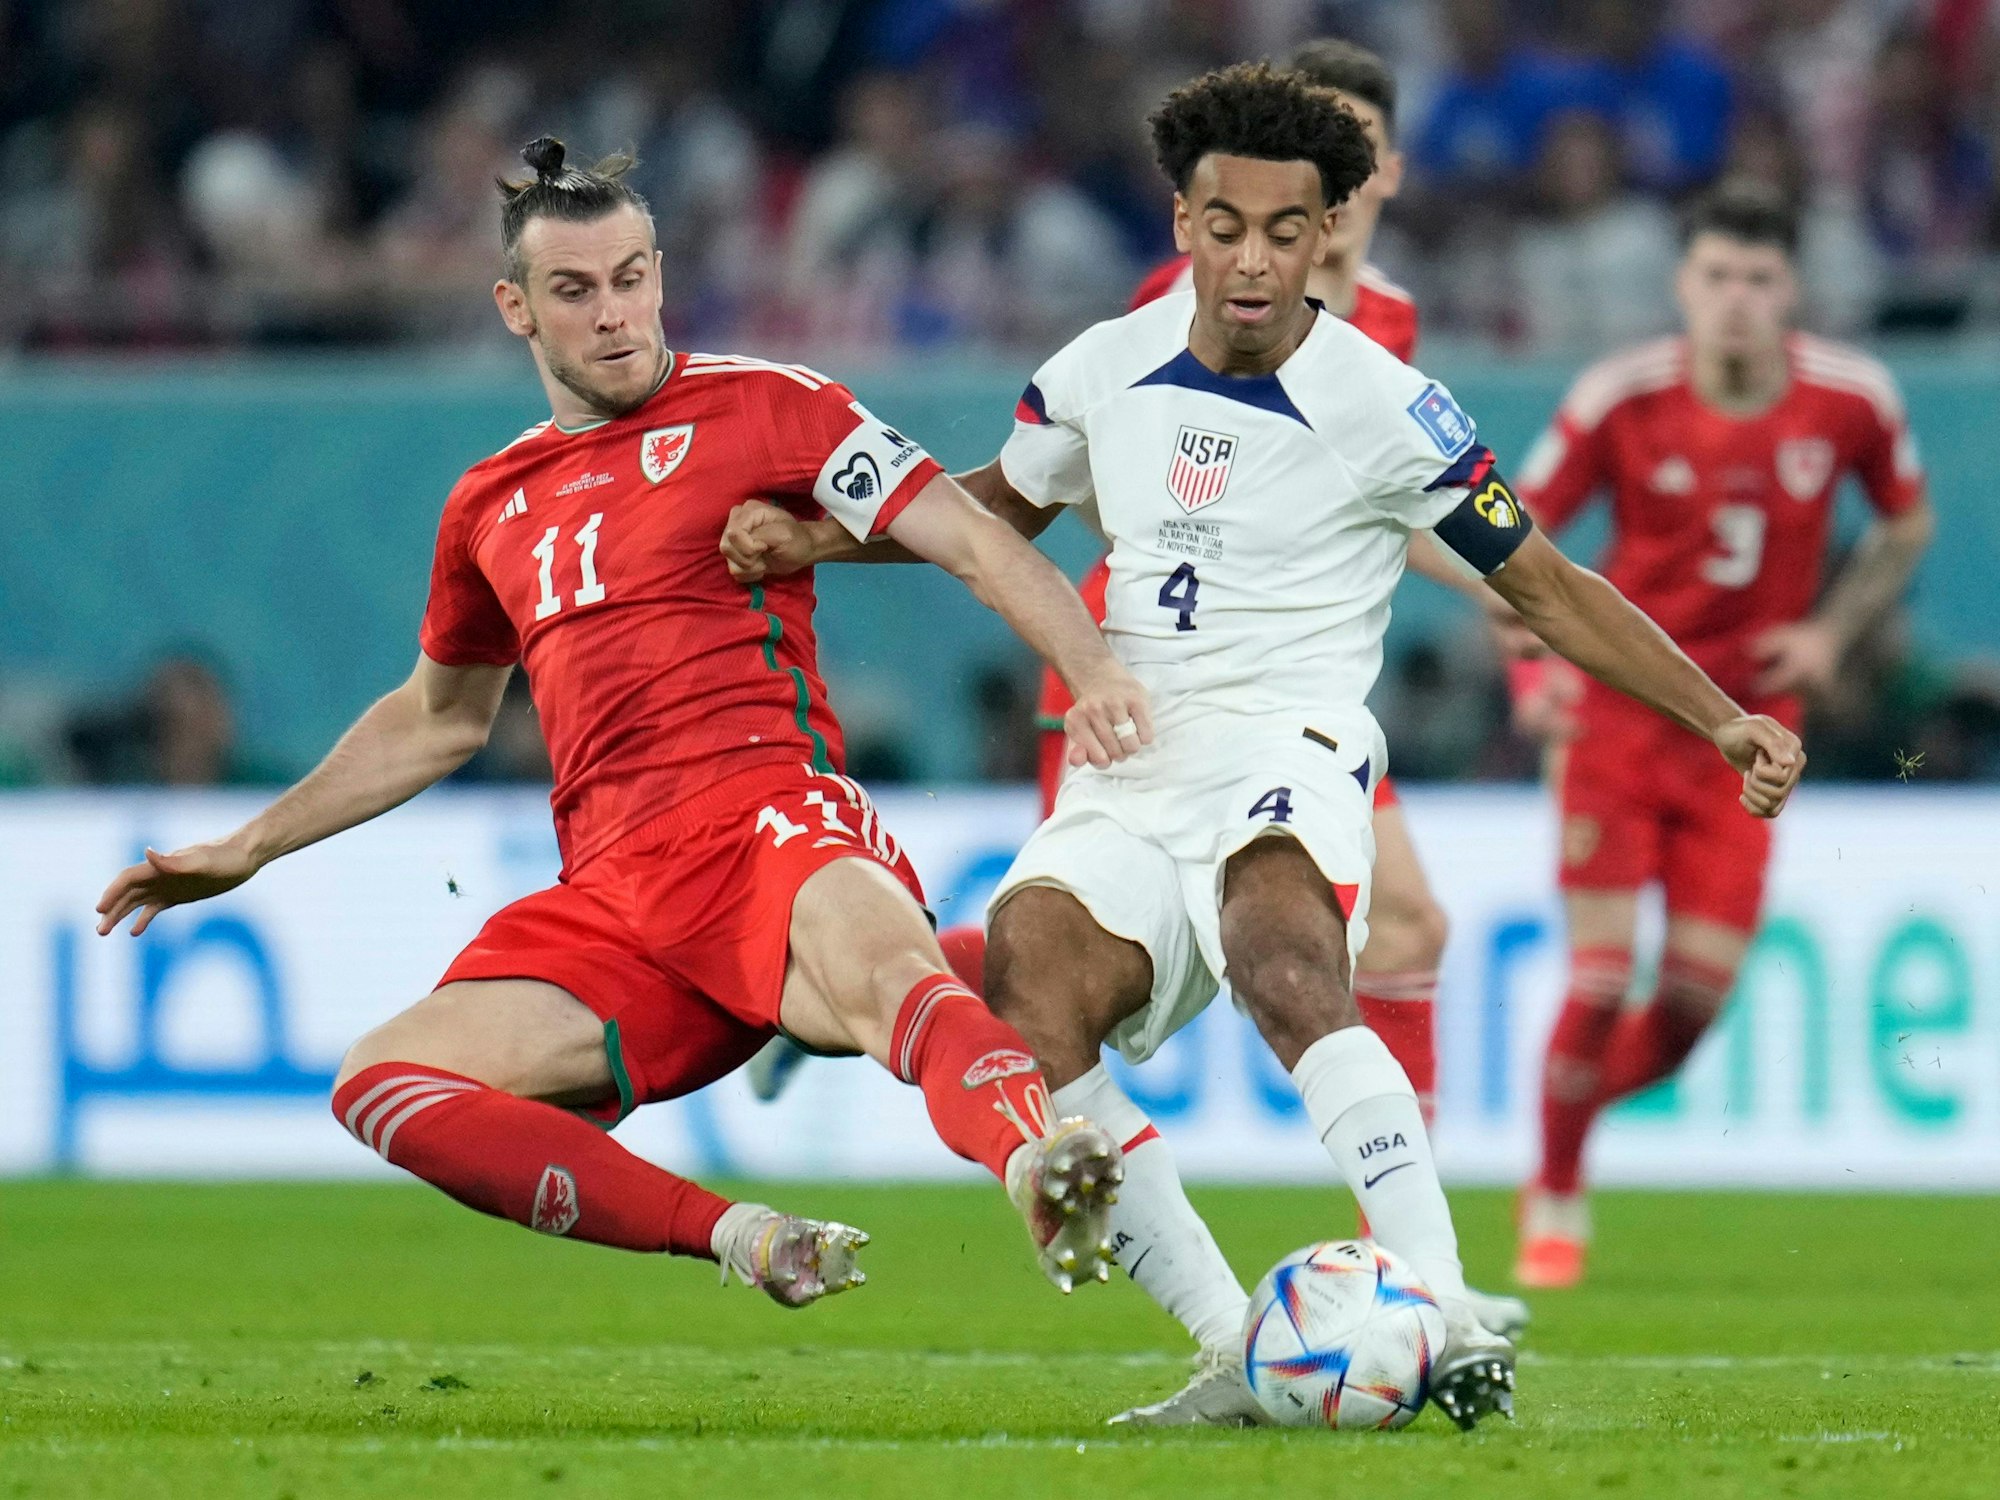 Wales' Gareth Bale, left, challenges for the ball with Tyler Adams of the United States during the World Cup, group B soccer match between the United States and Wales, at the Ahmad Bin Ali Stadium in Doha, Qatar, Monday, Nov. 21, 2022. (AP Photo/Ashley Landis)